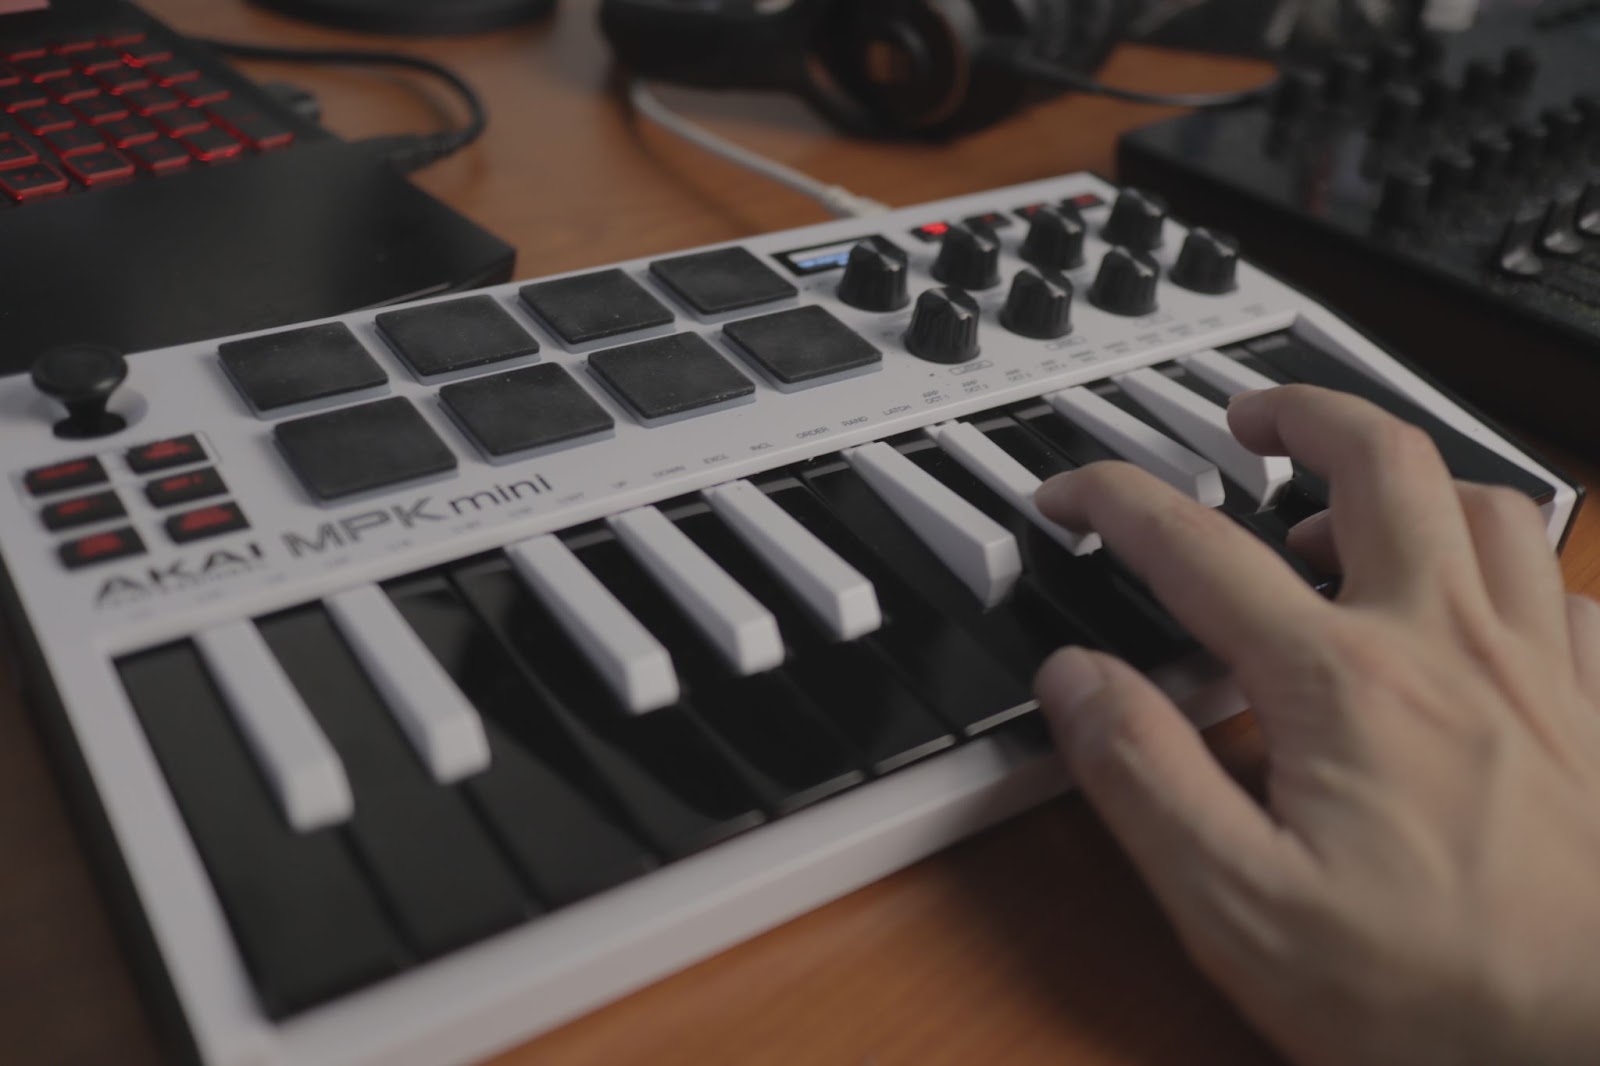 Getting Started with the AKAI MPK Mini